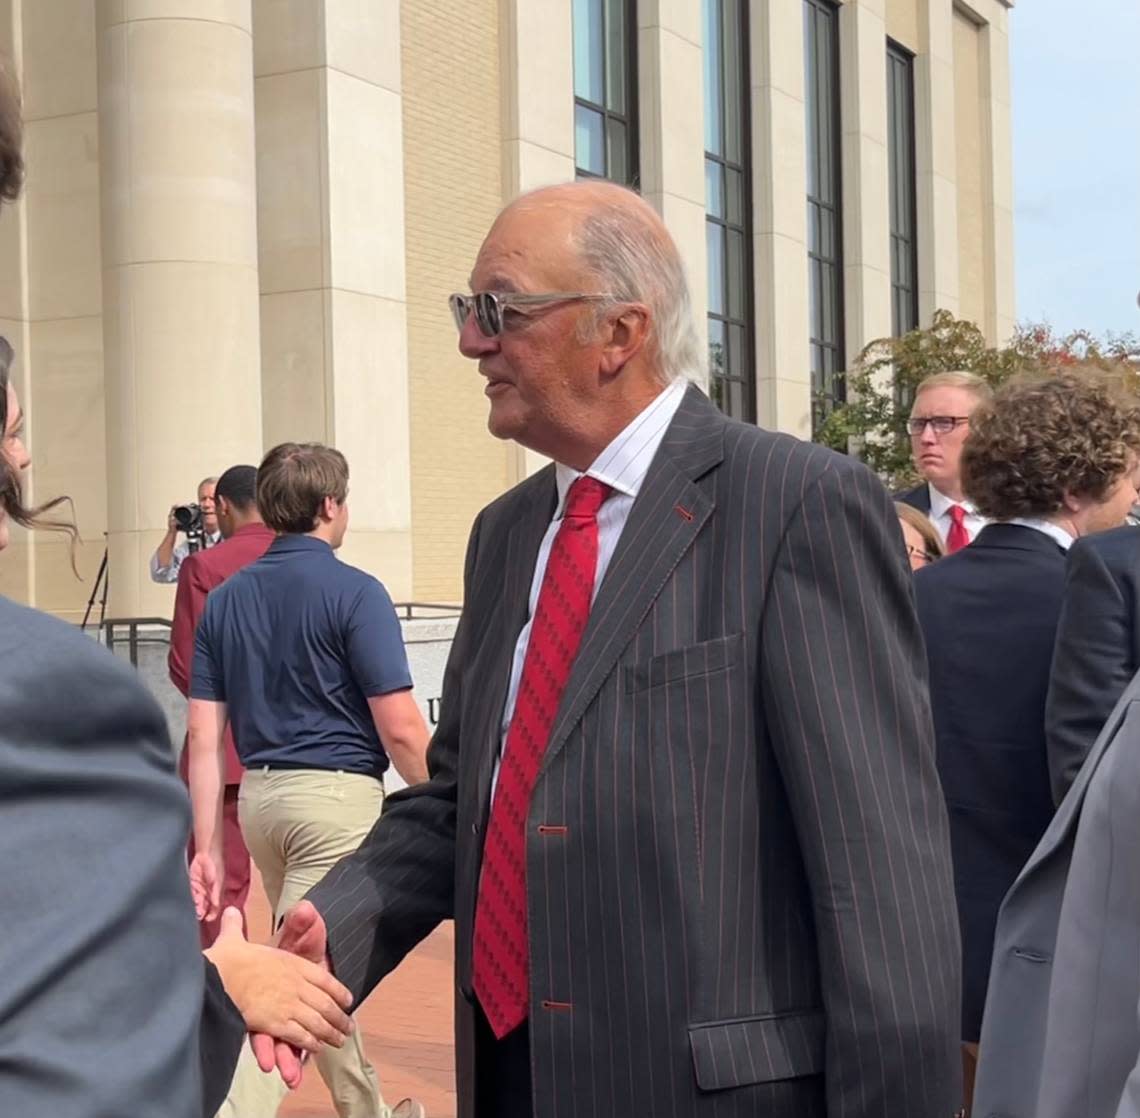 Joe Rice shakes hands with students at the renaming of the University of South Carolina’s School of Law.